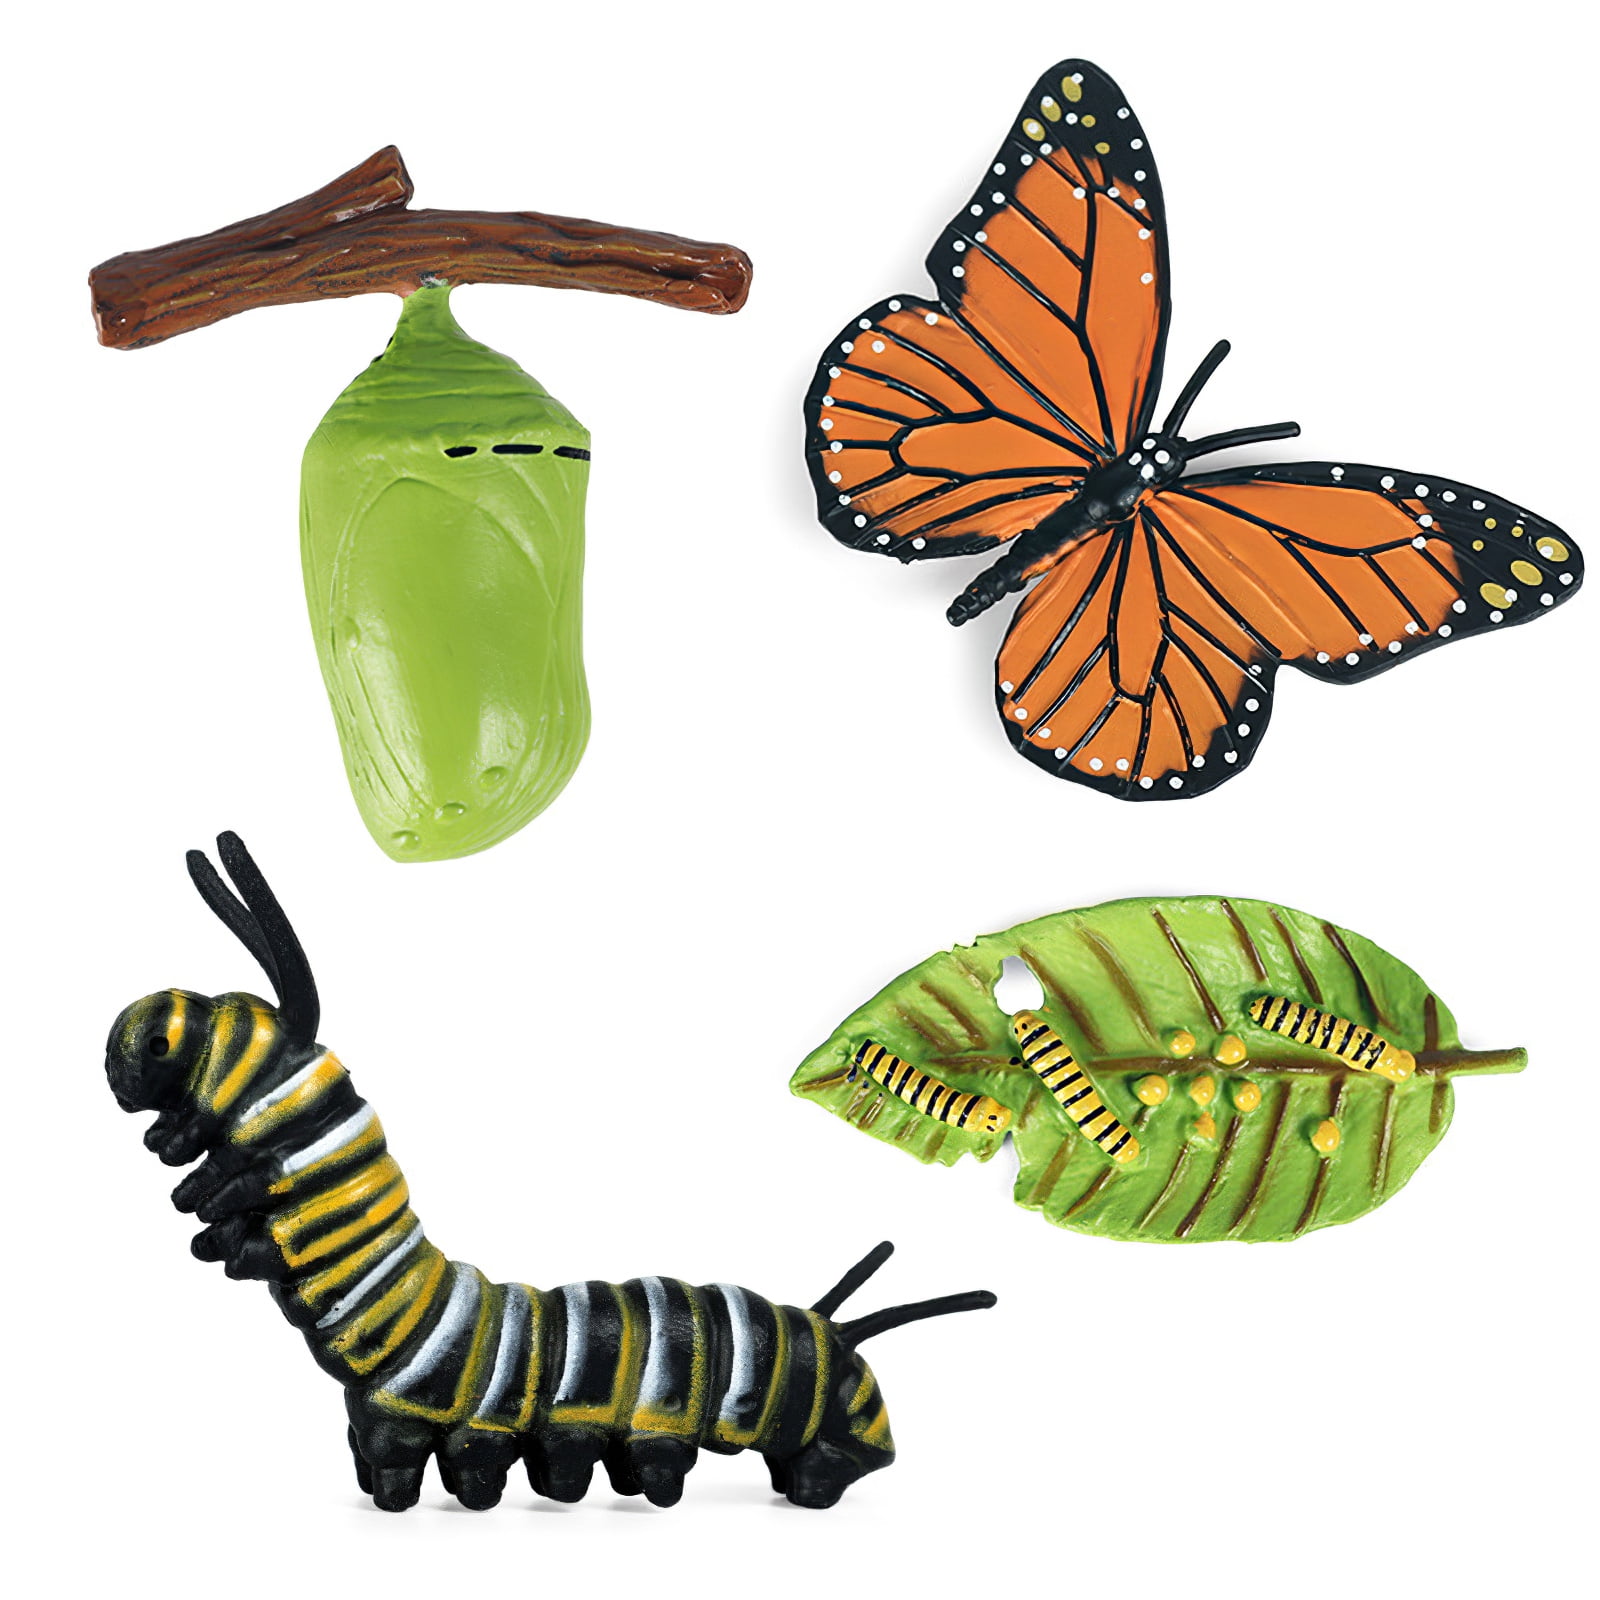 Simulation Butterfly Figures Animal Model Kids Developmental Toy Pack of 12 